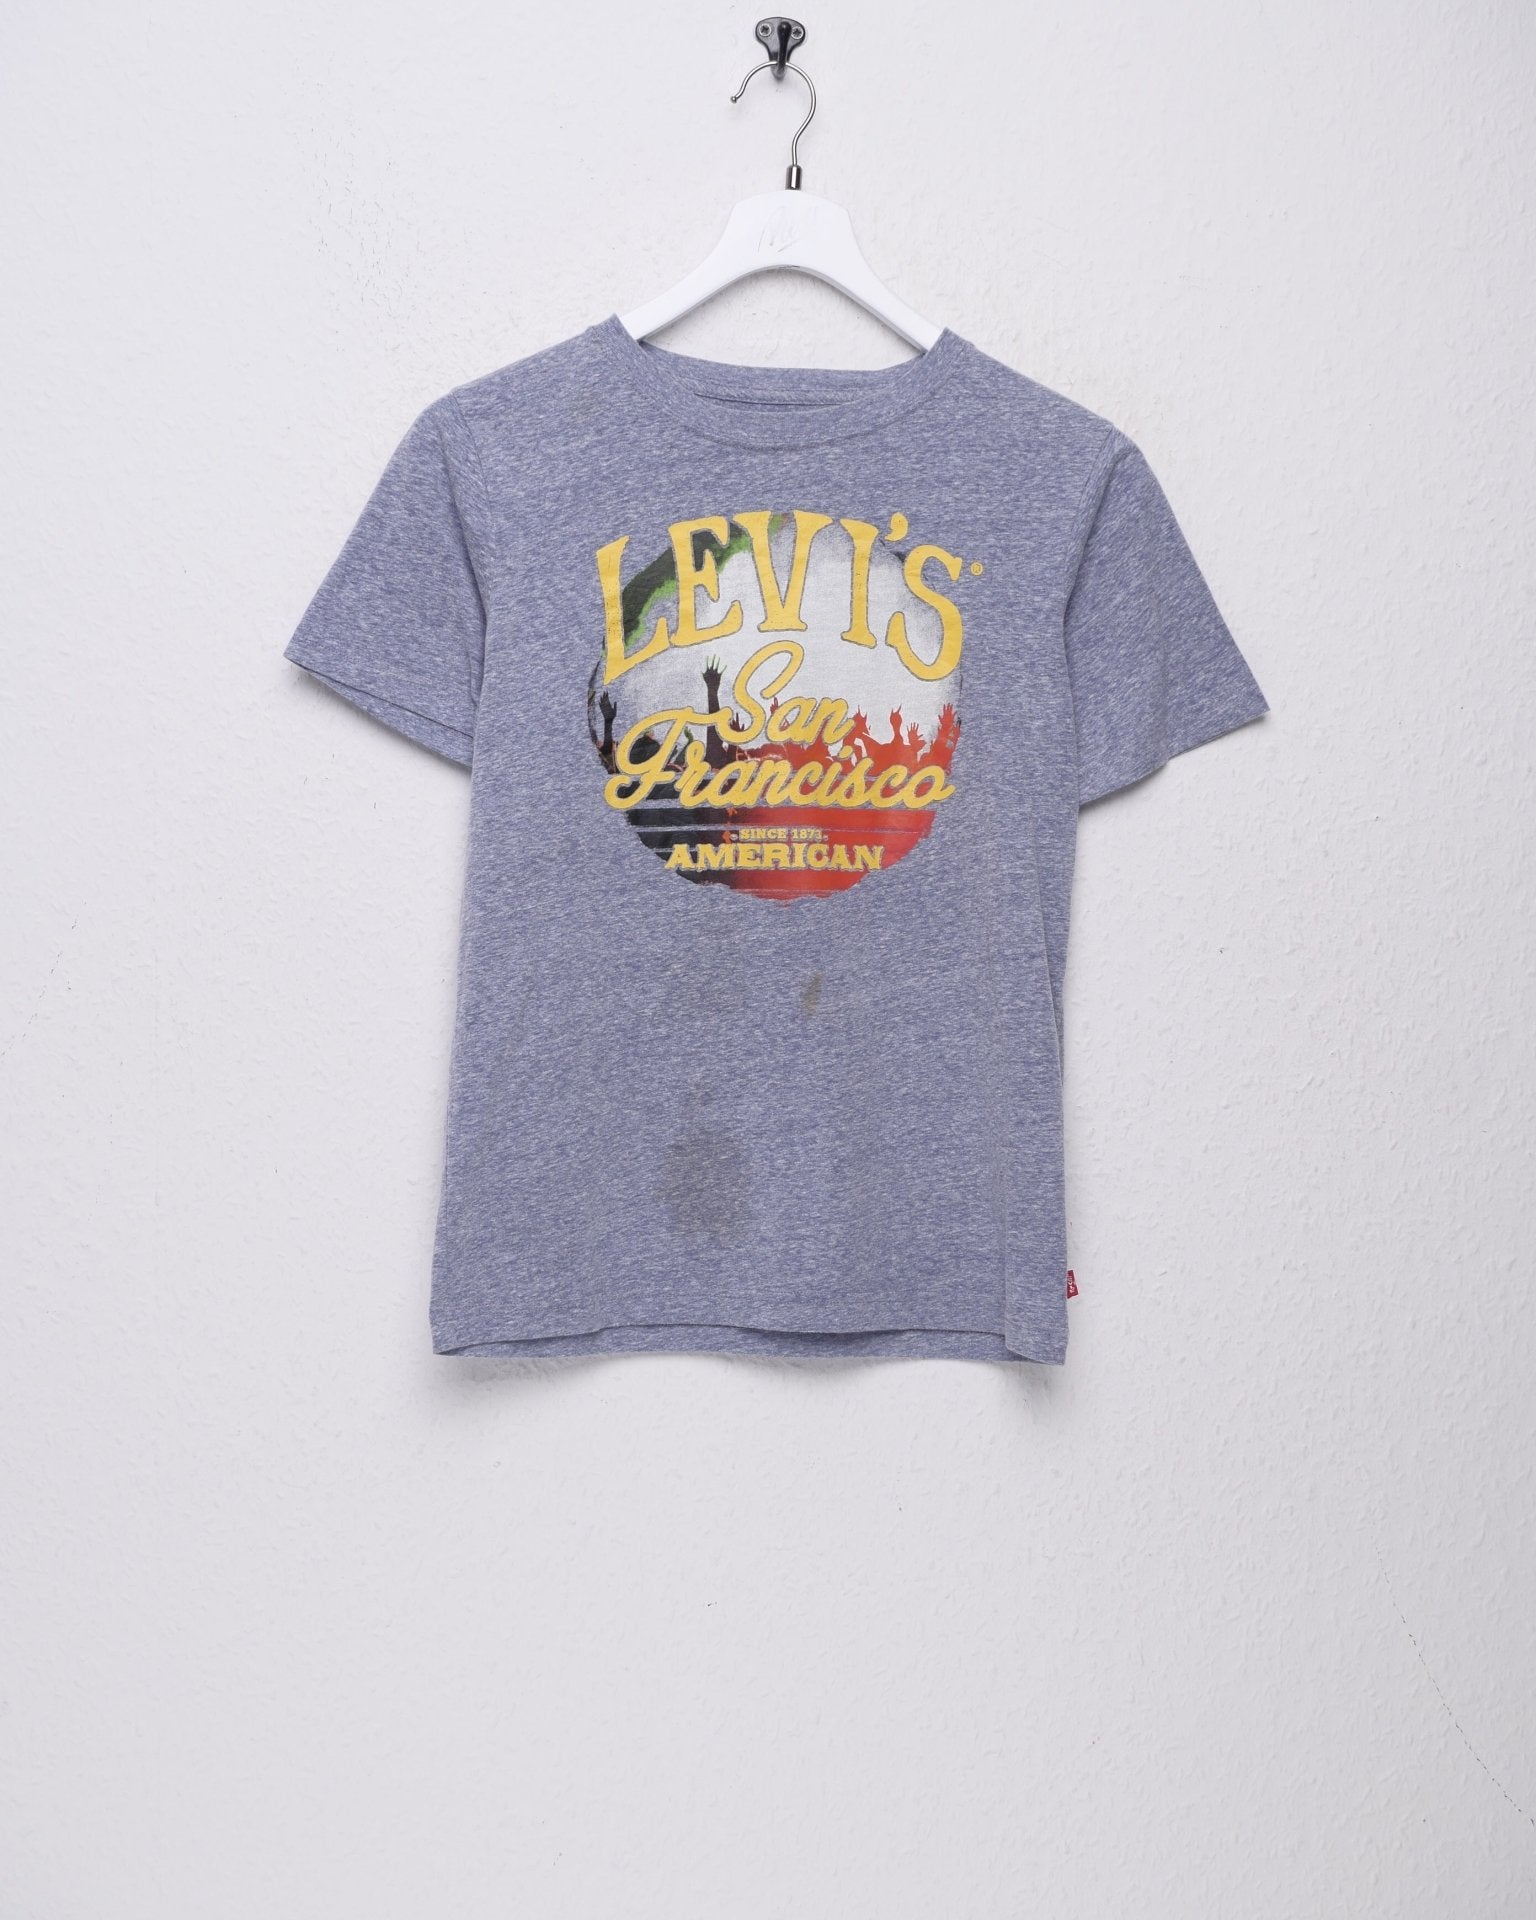 Levi's printed Spellout Graphic Shirt - Peeces